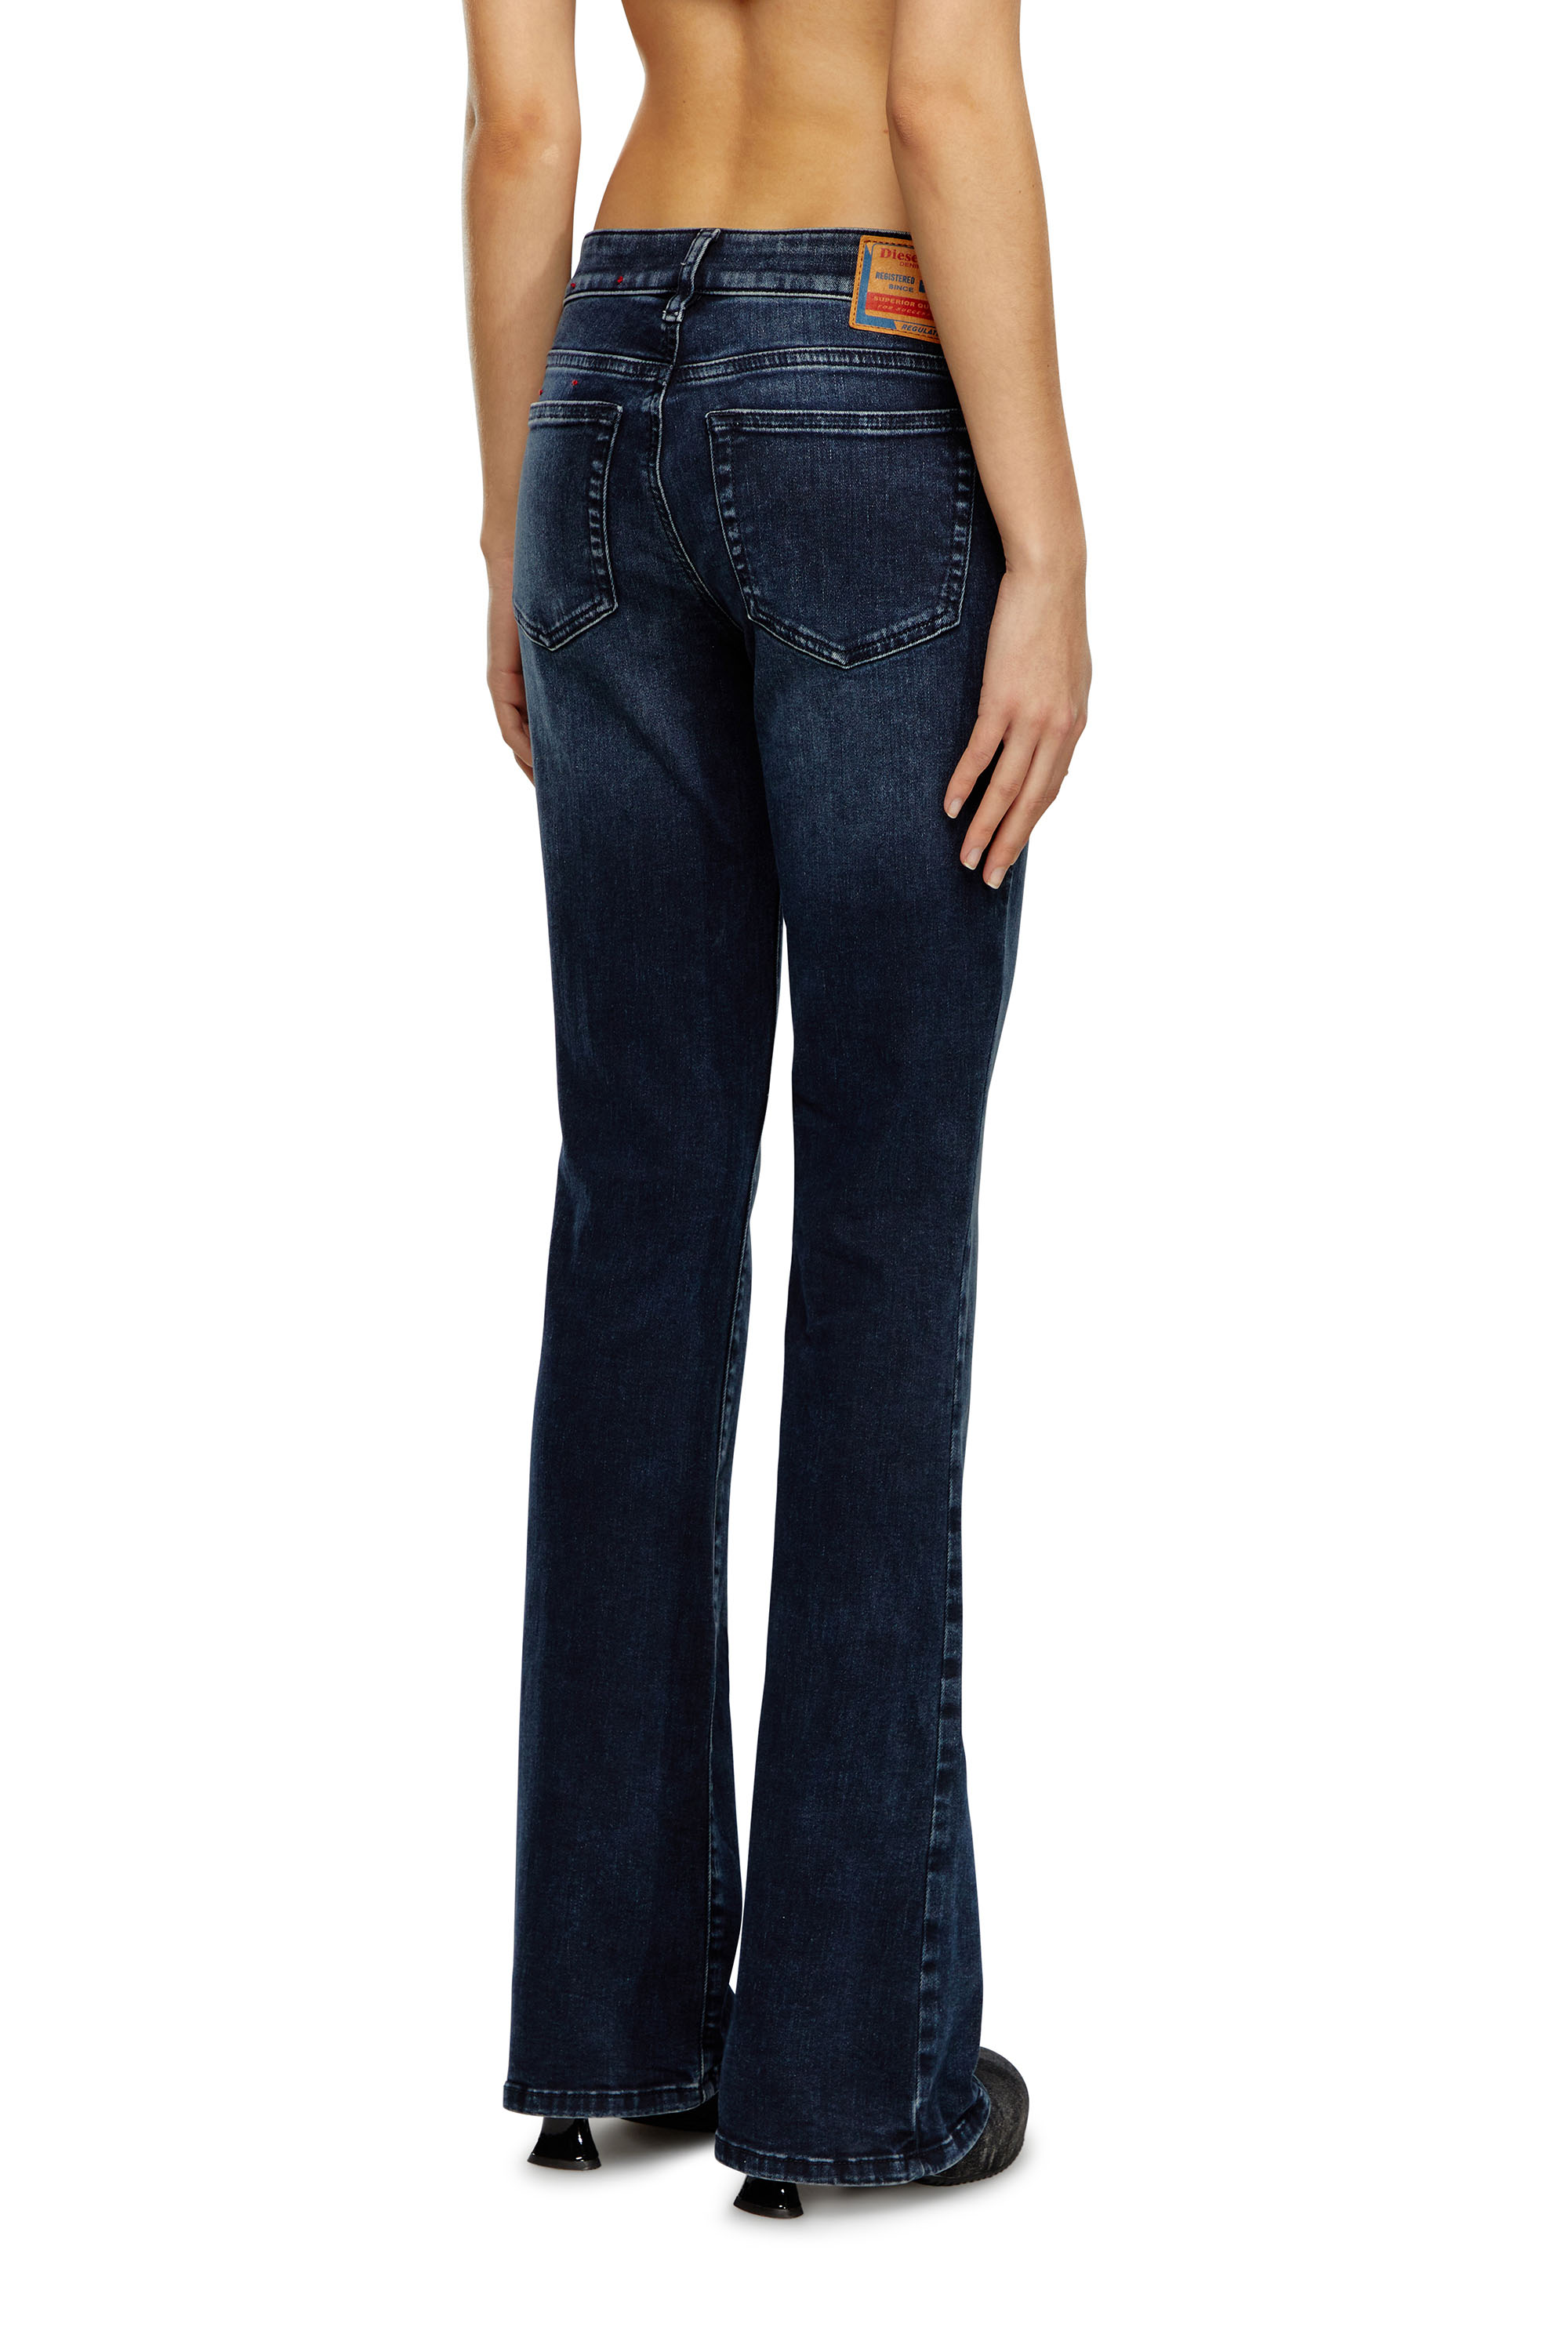 Diesel - Bootcut and Flare Jeans 1969 D-Ebbey 0ENAR, Mujer Bootcut y Flare Jeans - 1969 D-Ebbey in Azul marino - Image 3